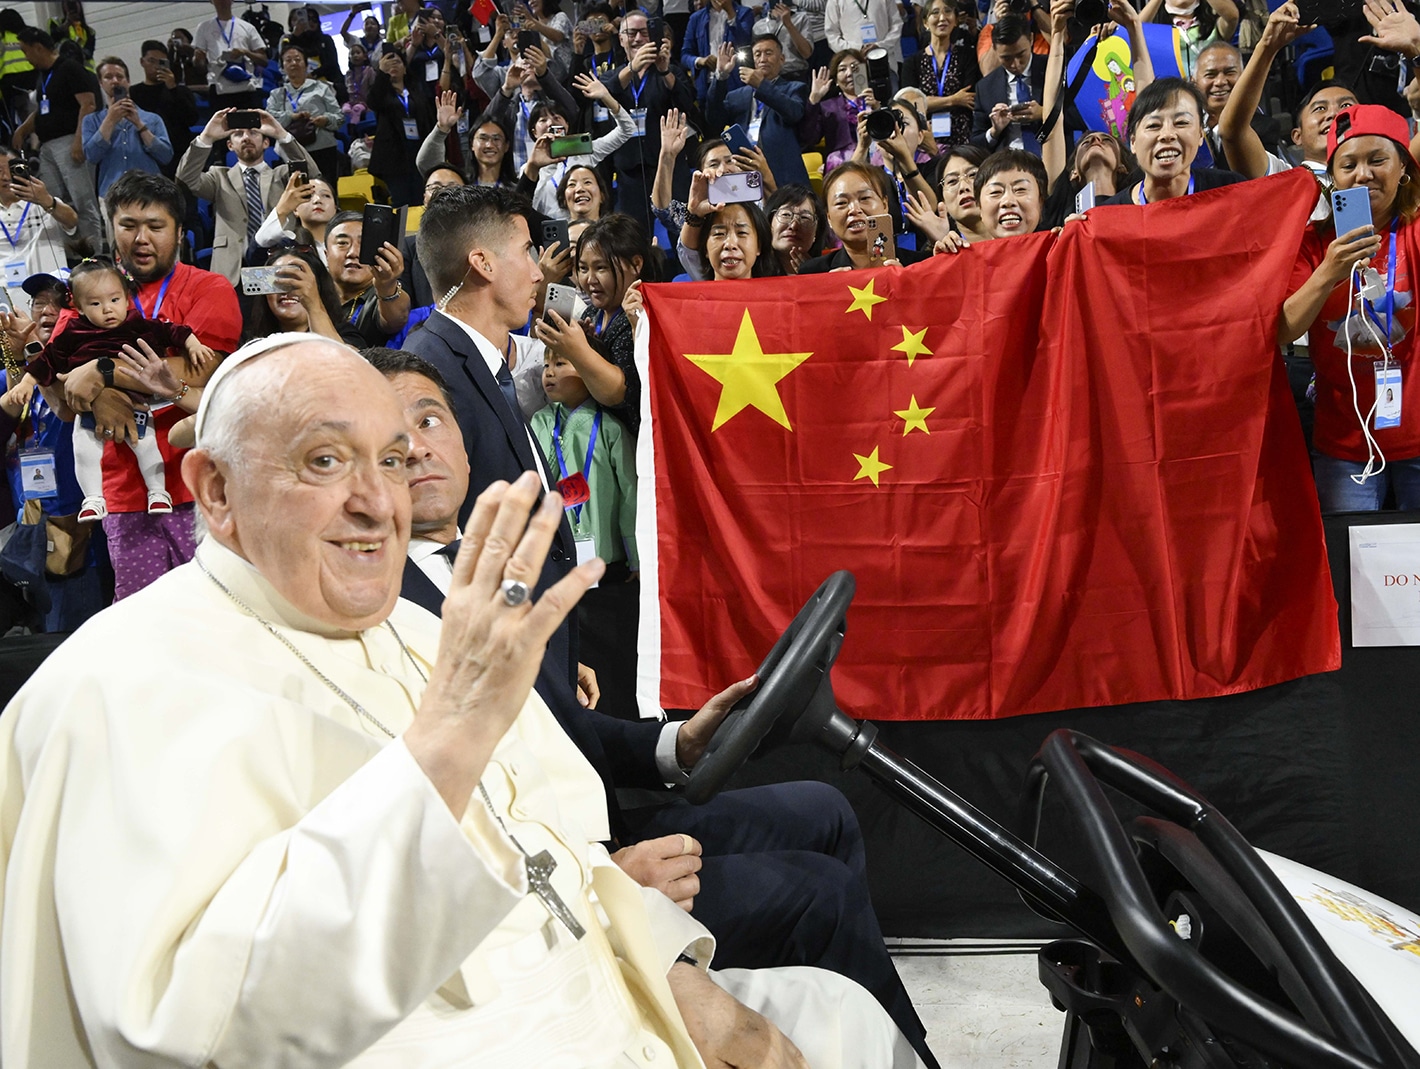 POPE FRANCIS CHINESE FLAG